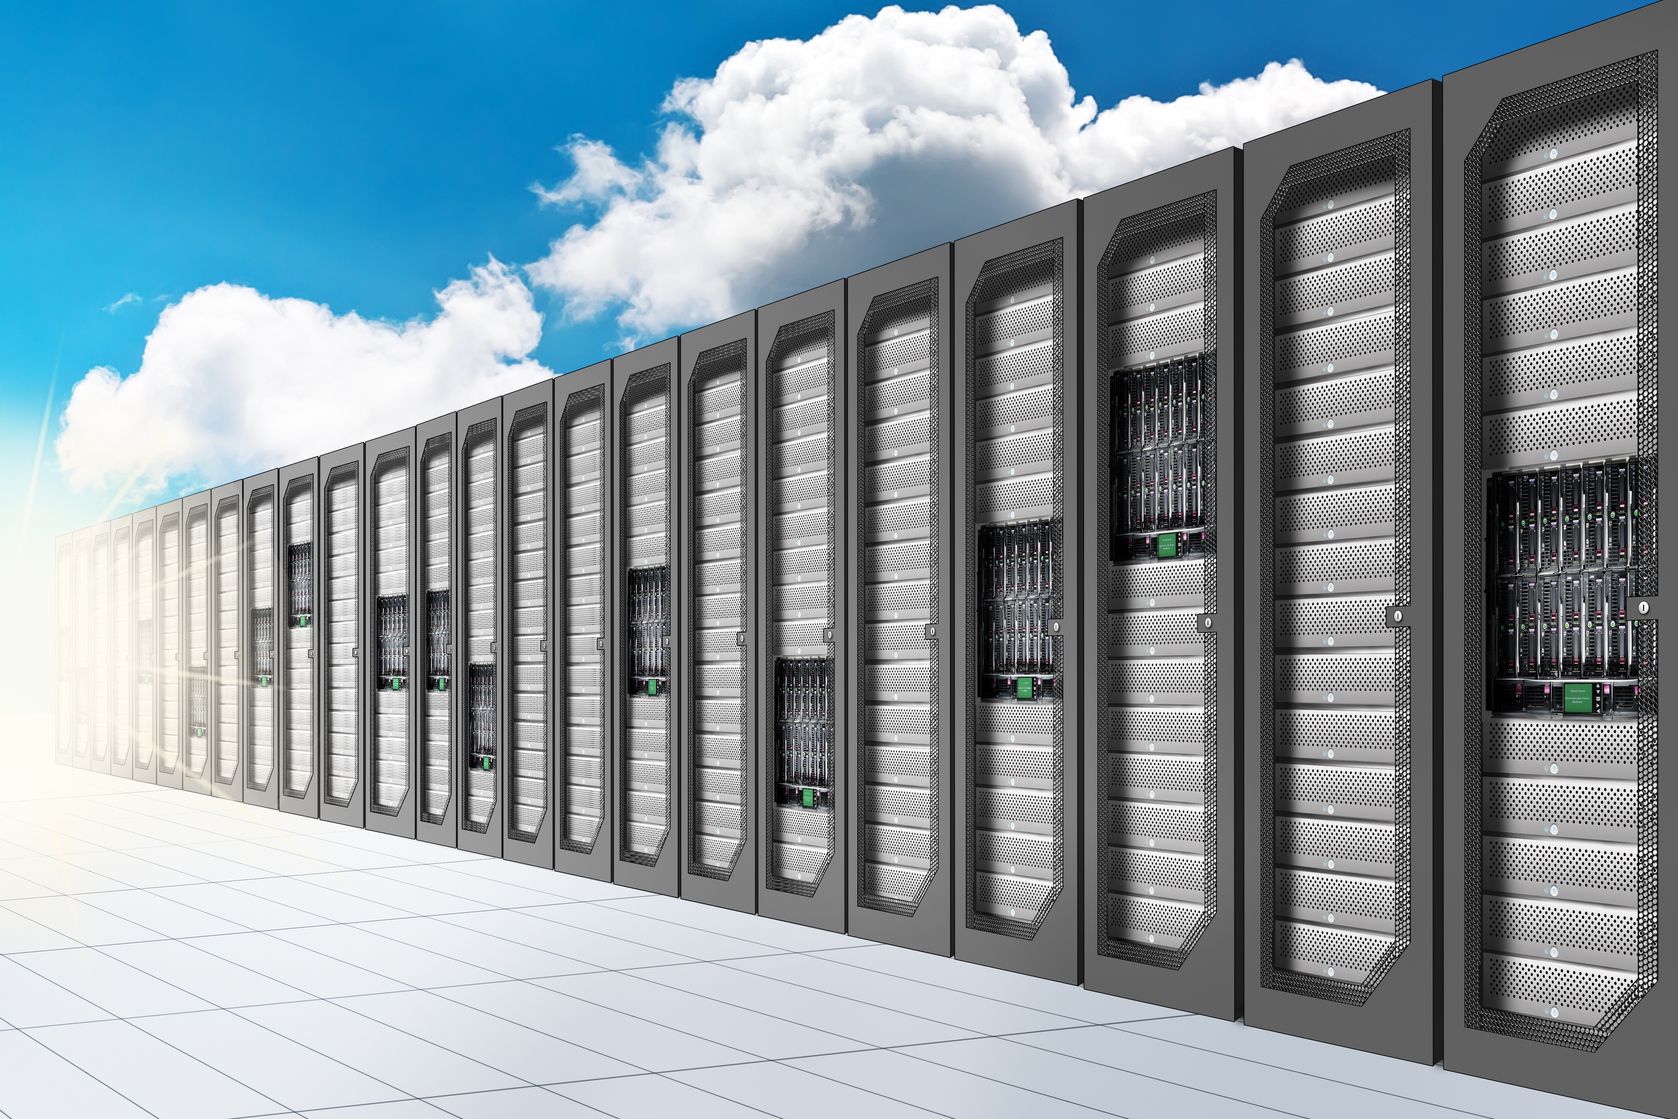 Legacy computing environments transitioning into the Cloud.